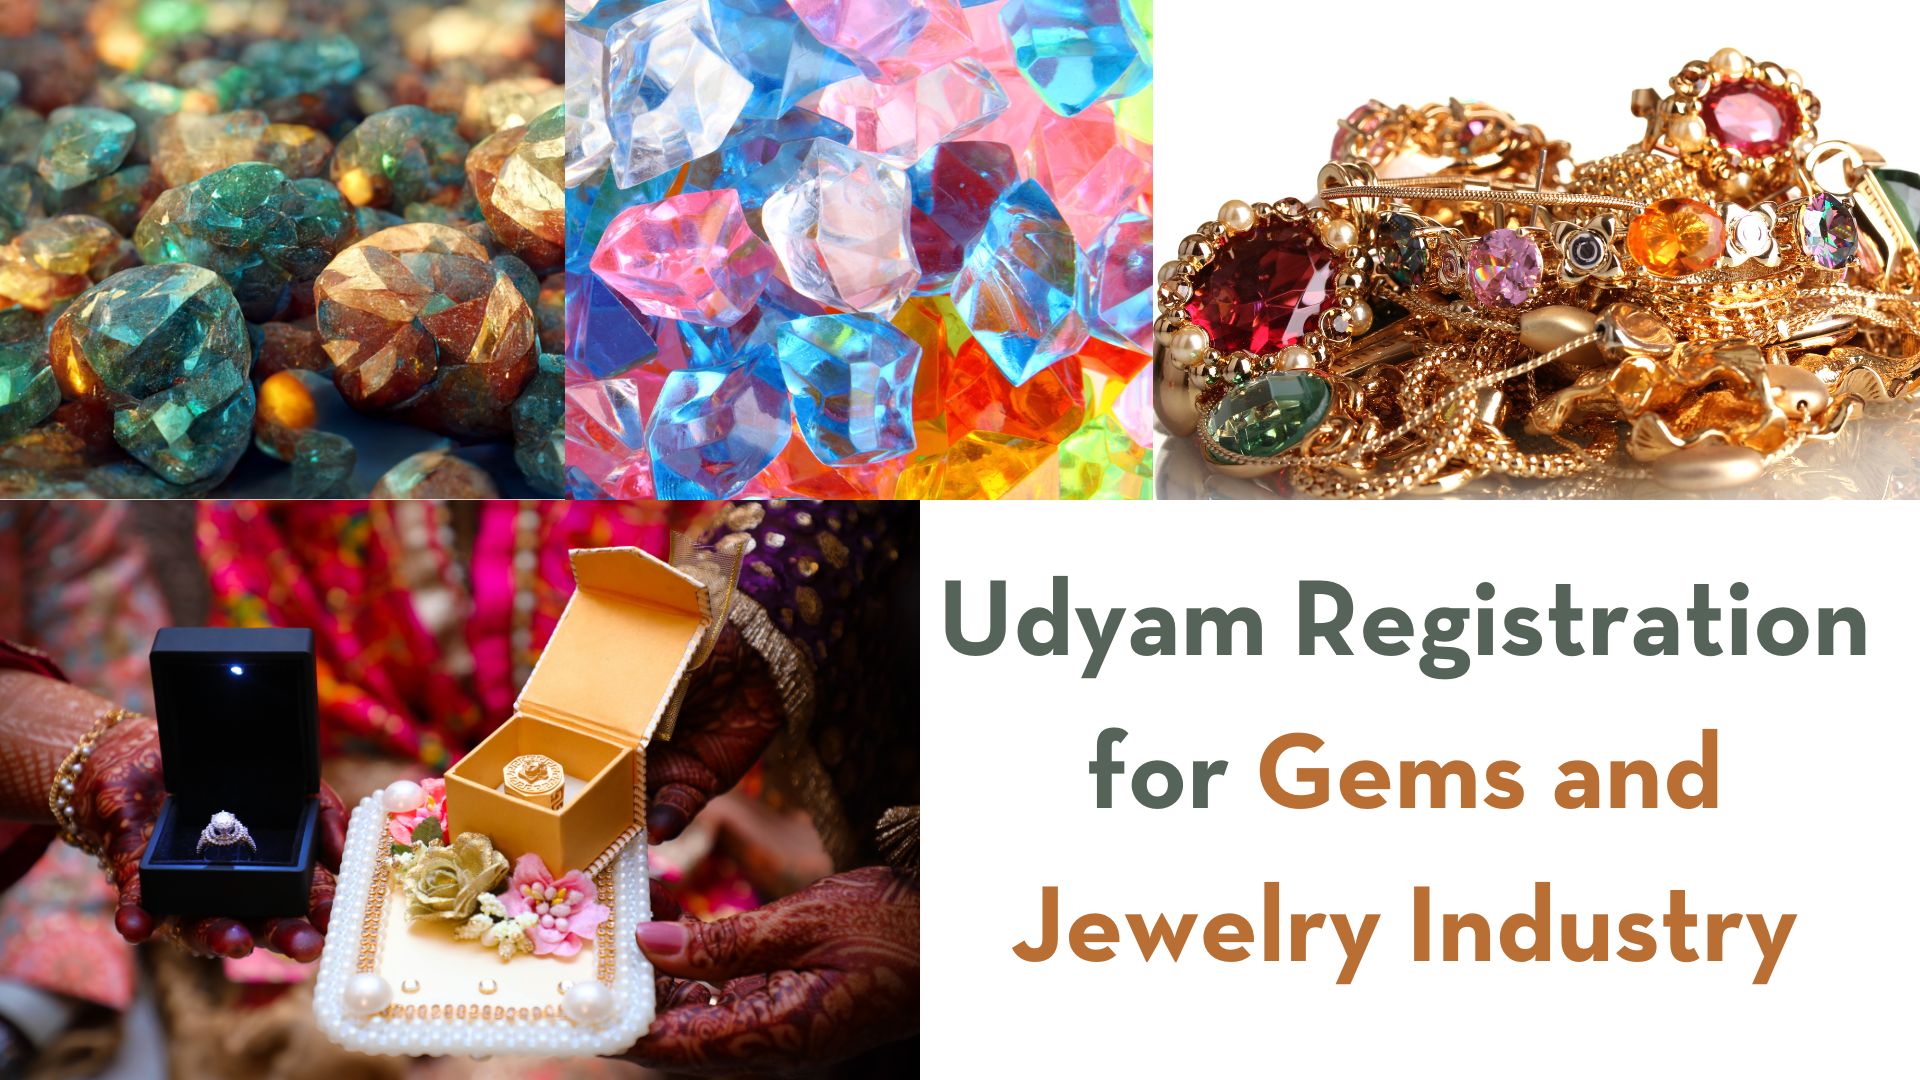 Udyam Registration for Gems and Jewelry Industry